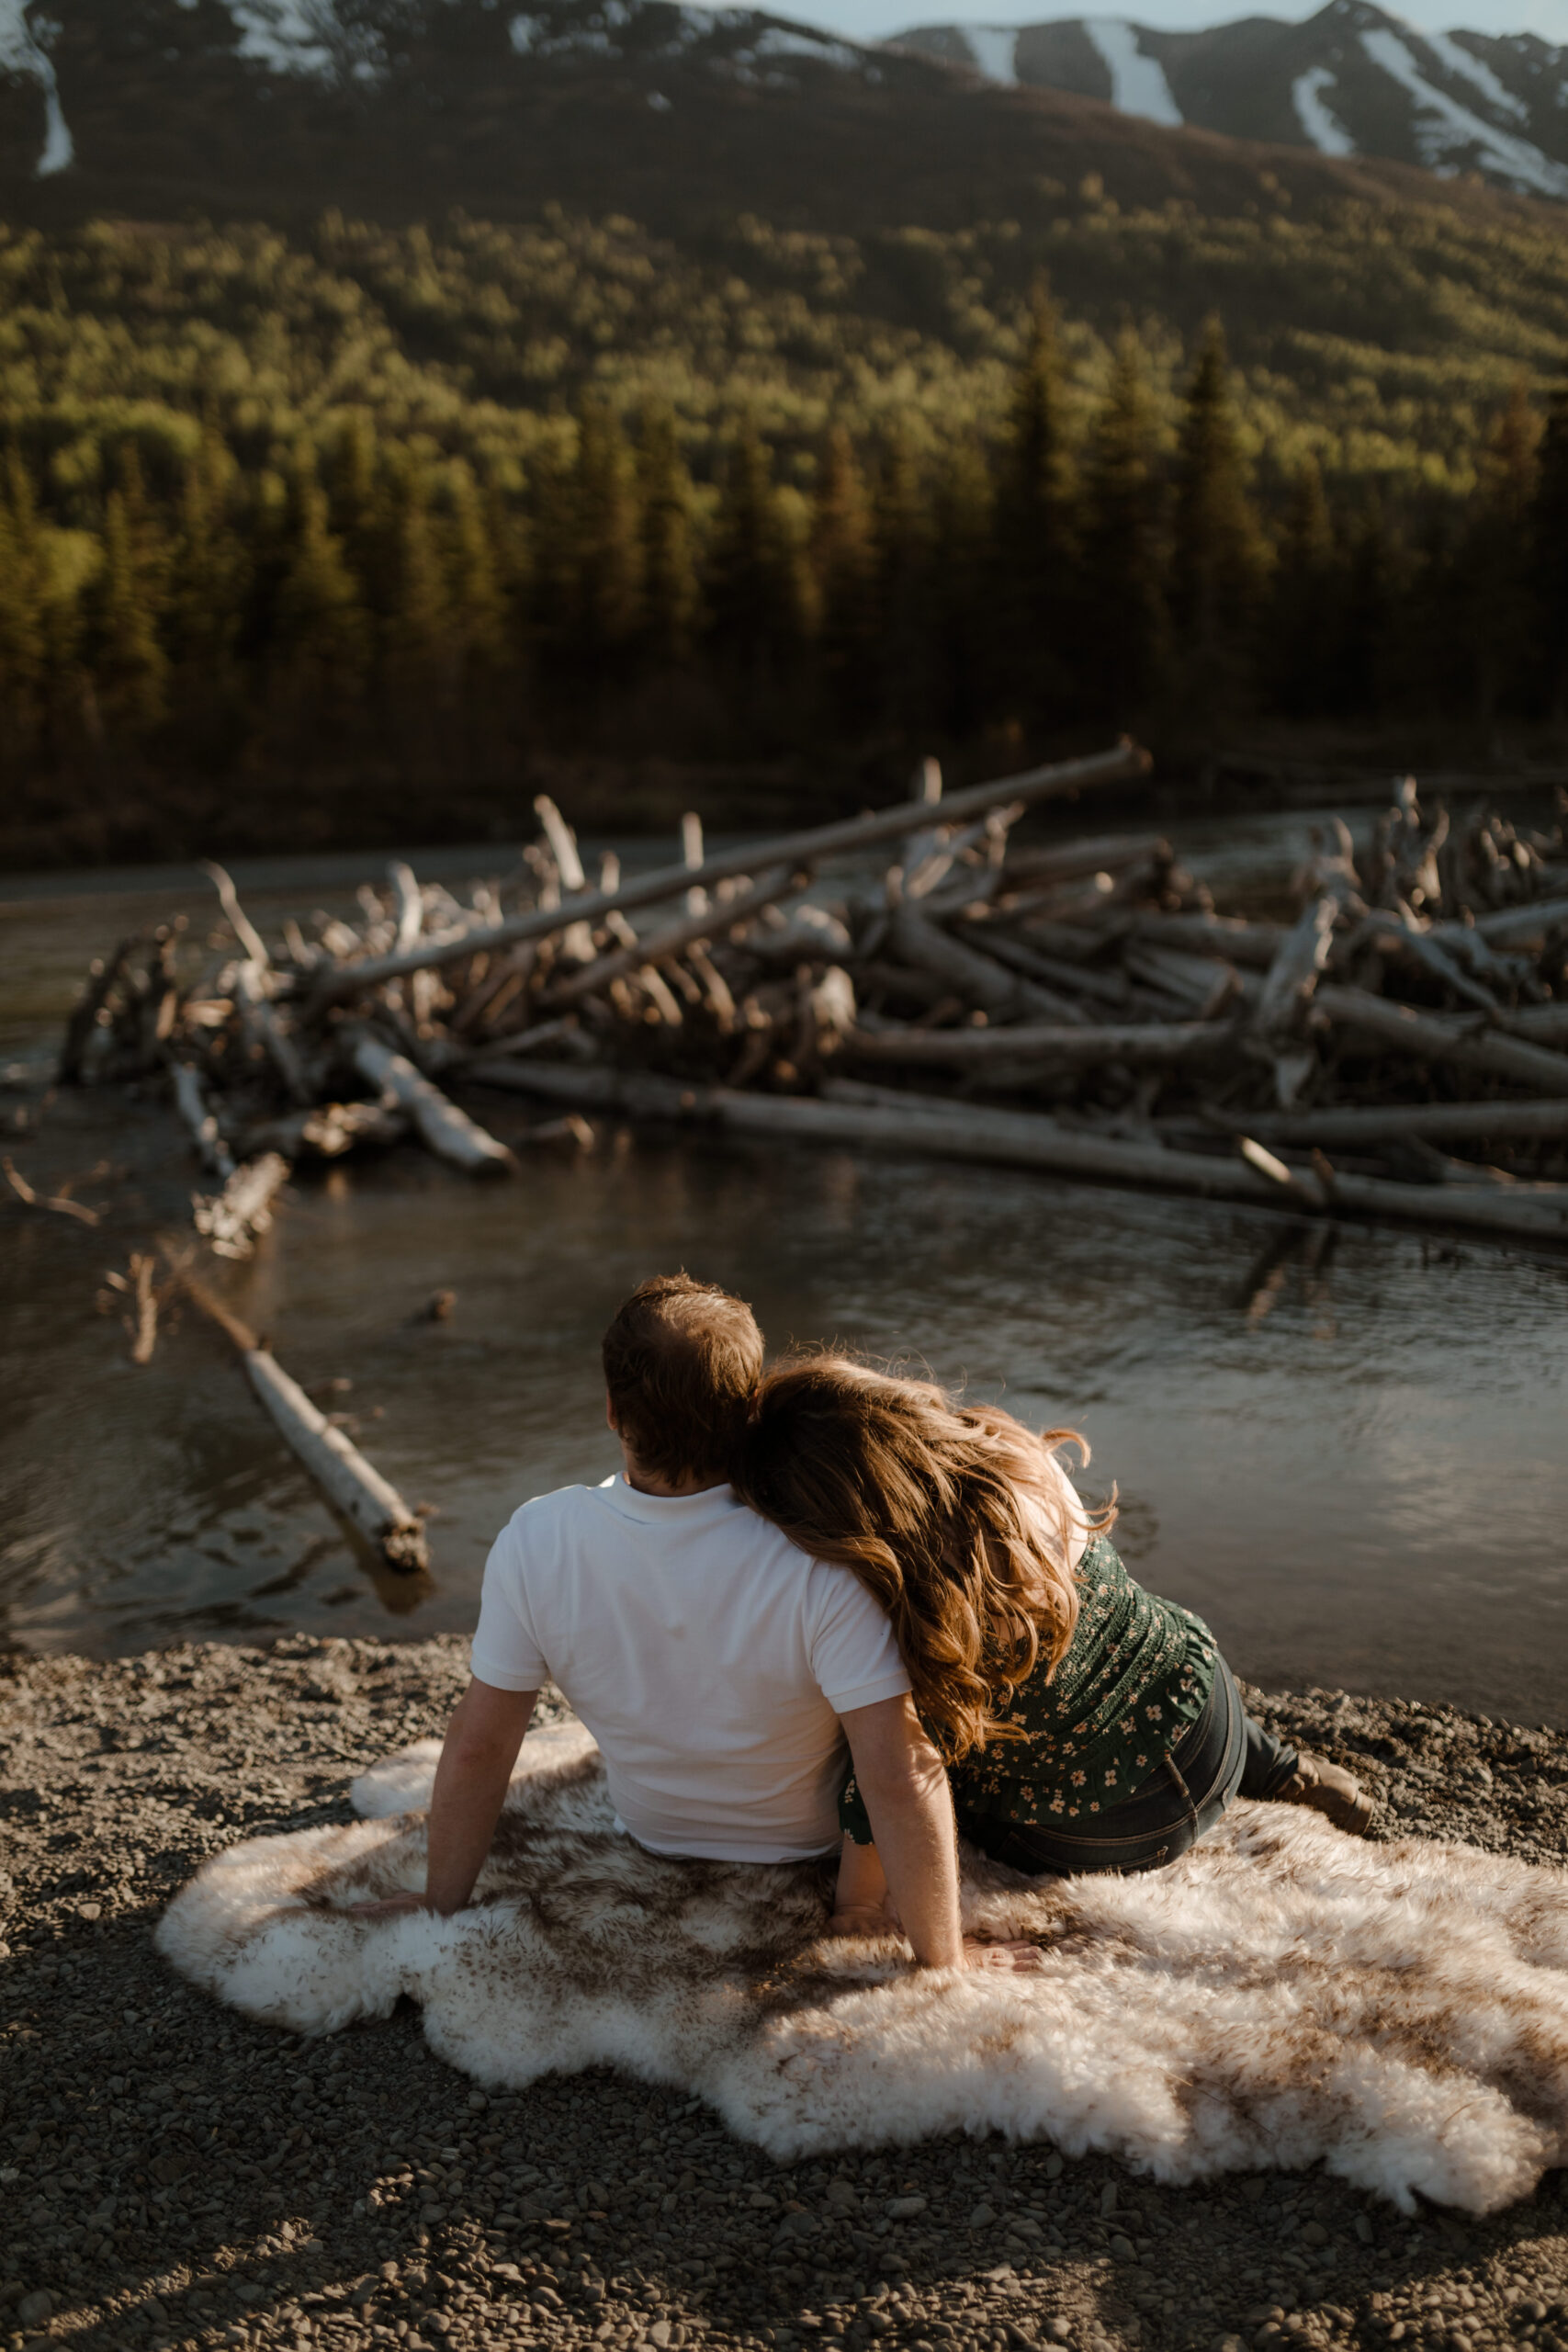 Couple with mountains behind them during golden hour sitting by river in Eagle River, Alaska